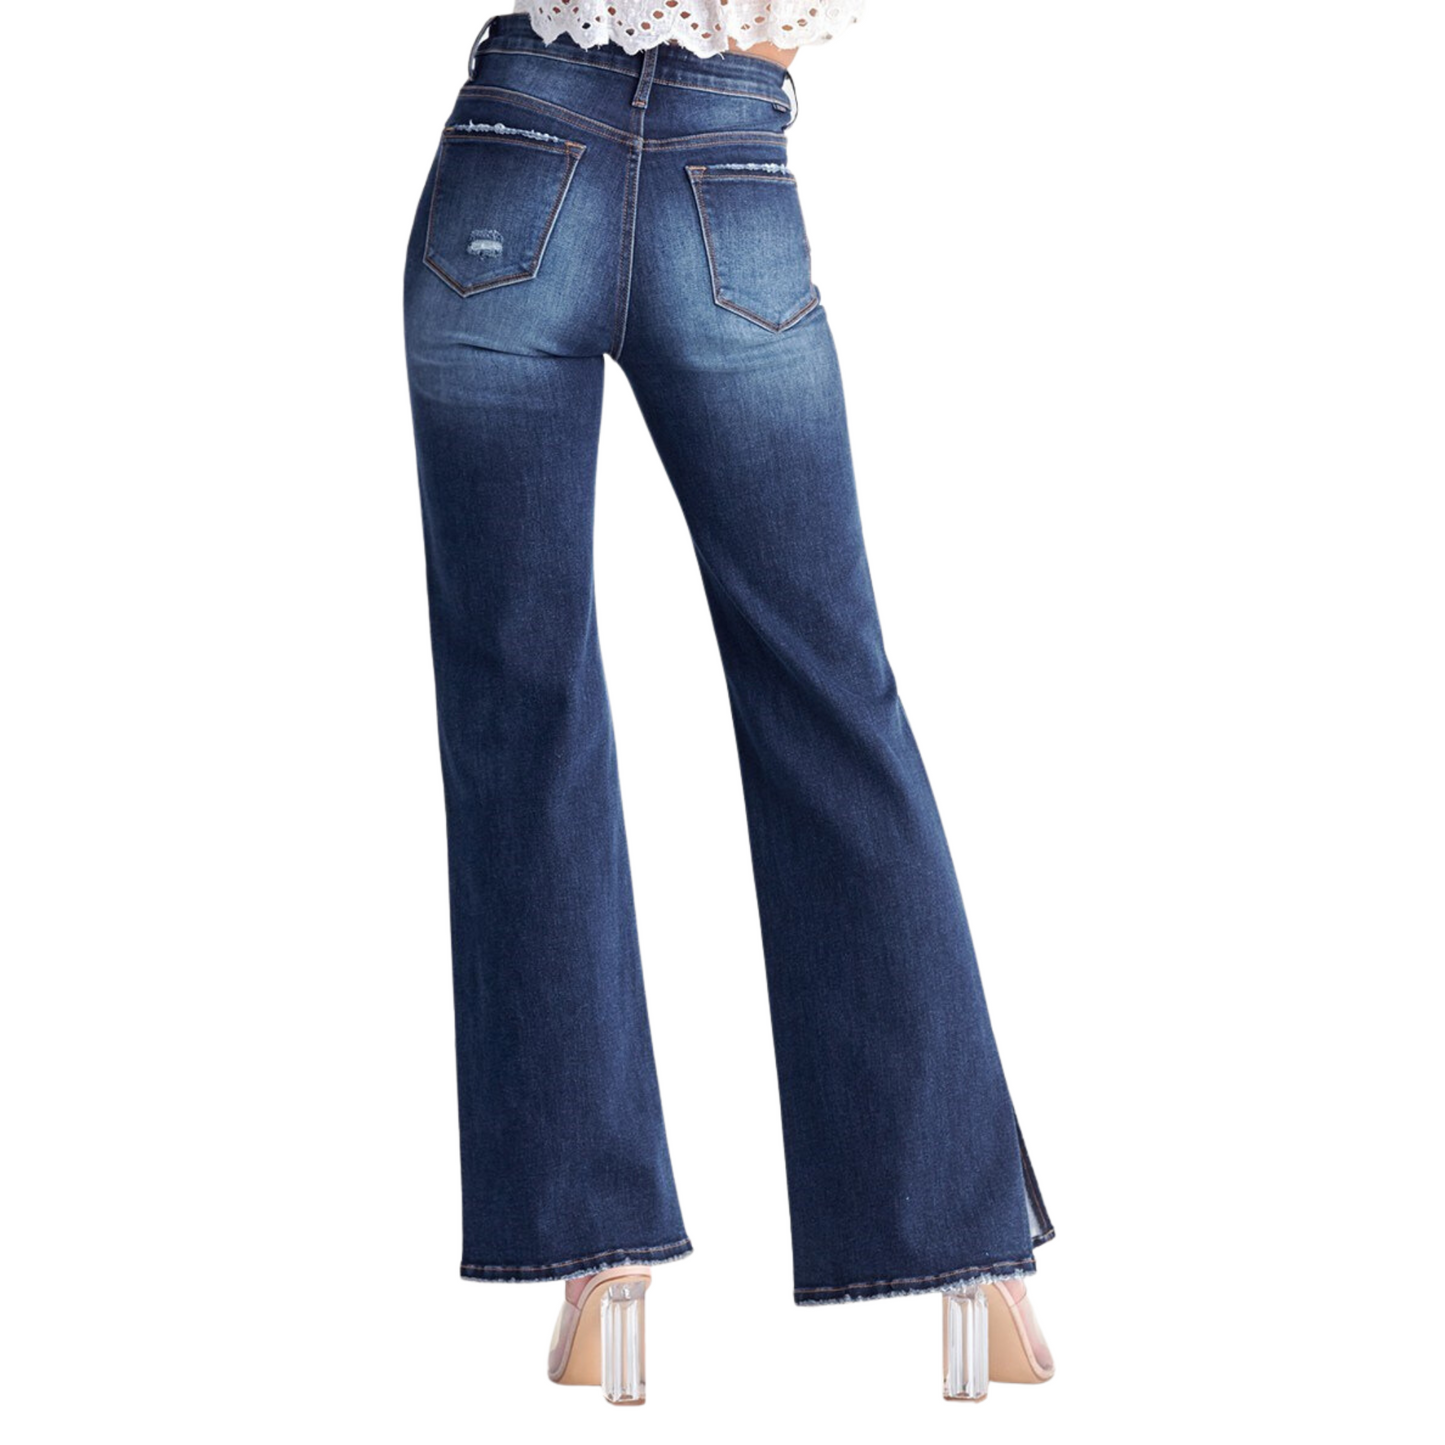 Our High Rise Distressed Wide Flare Jeans are the perfect combination of style and comfort, constructed from durable dark wash denim. The high rise accentuates your figure while the distressed details and wide flare provide an on-trend look. Dress it up or dress it down - you can't go wrong either way.